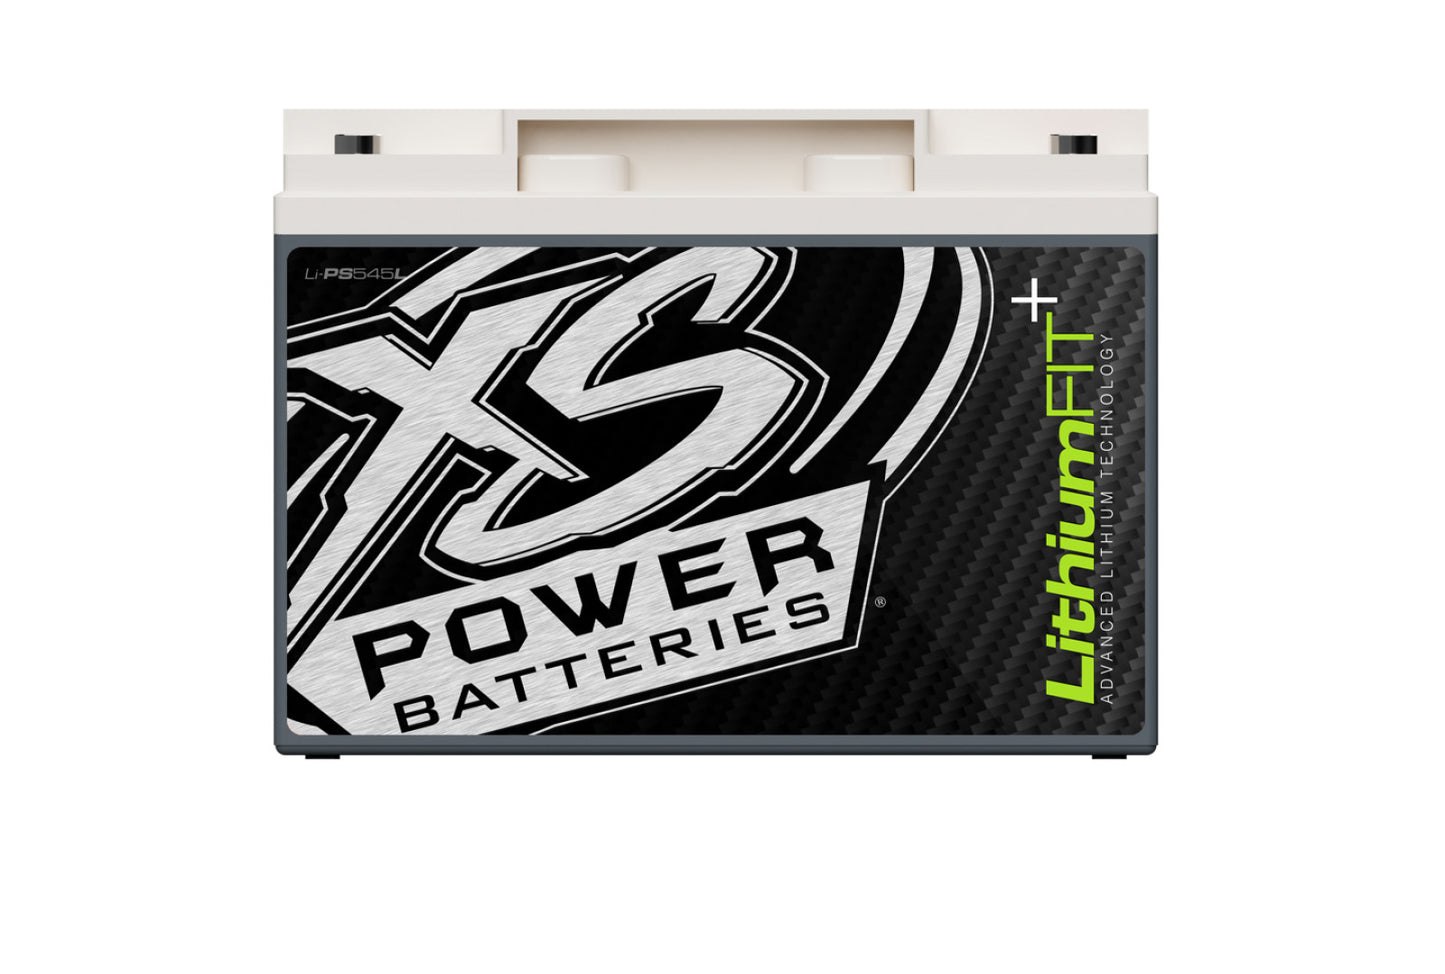 XS Power Batteries Lithium Powersports Series Batteries - M6 Terminal Bolts Included 240 Max Amps